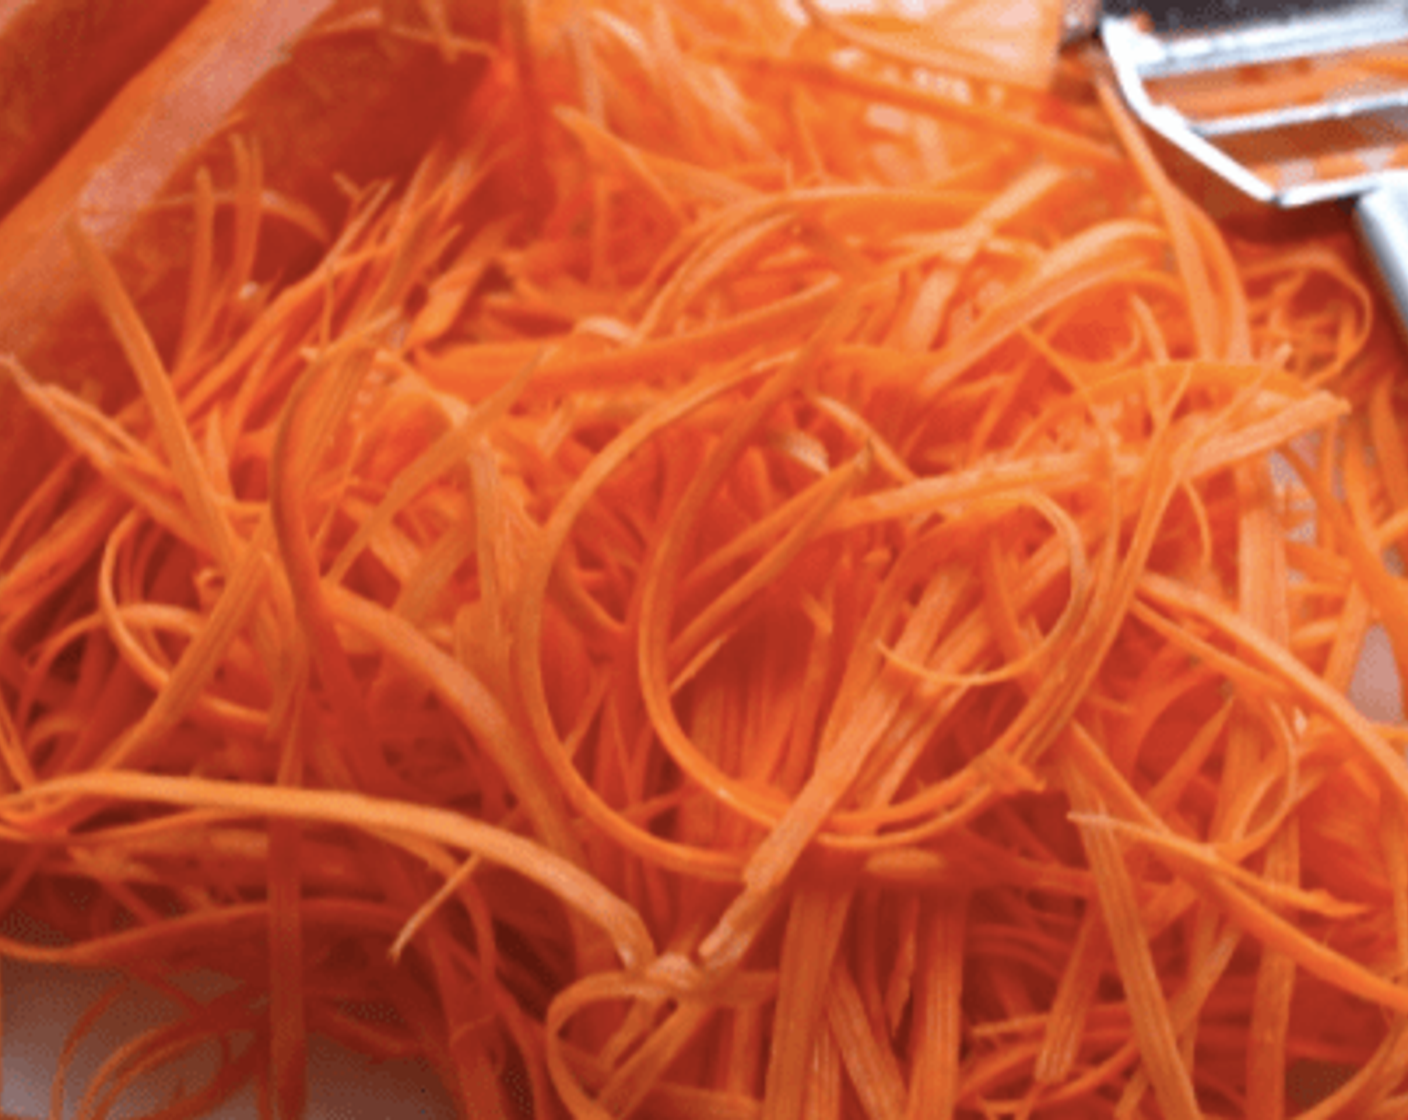 step 1 Using a sharp knife, cut the Carrots (4 cups) into long, thin matchsticks. If you have a julienne peeler, or Spiralizer, this will be even easier. Place in a large mixing bowl.